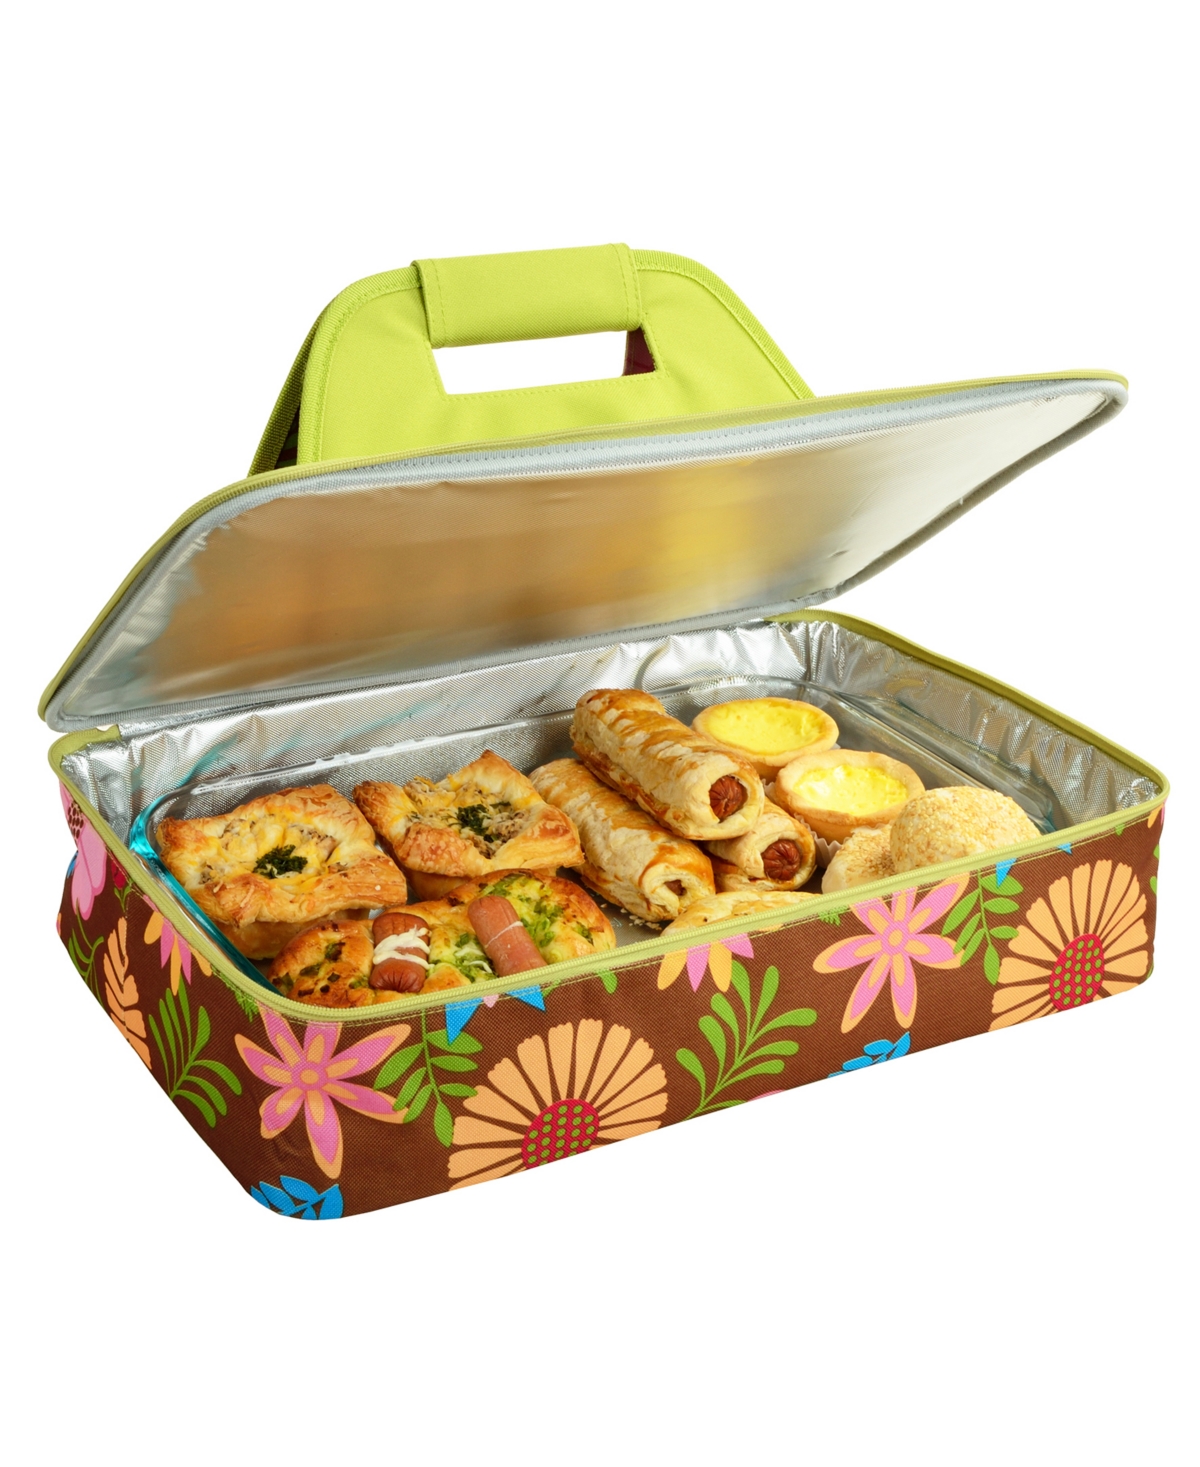 Insulated Food or Casserole Carrier to keep Food Hot or Cold - Blue